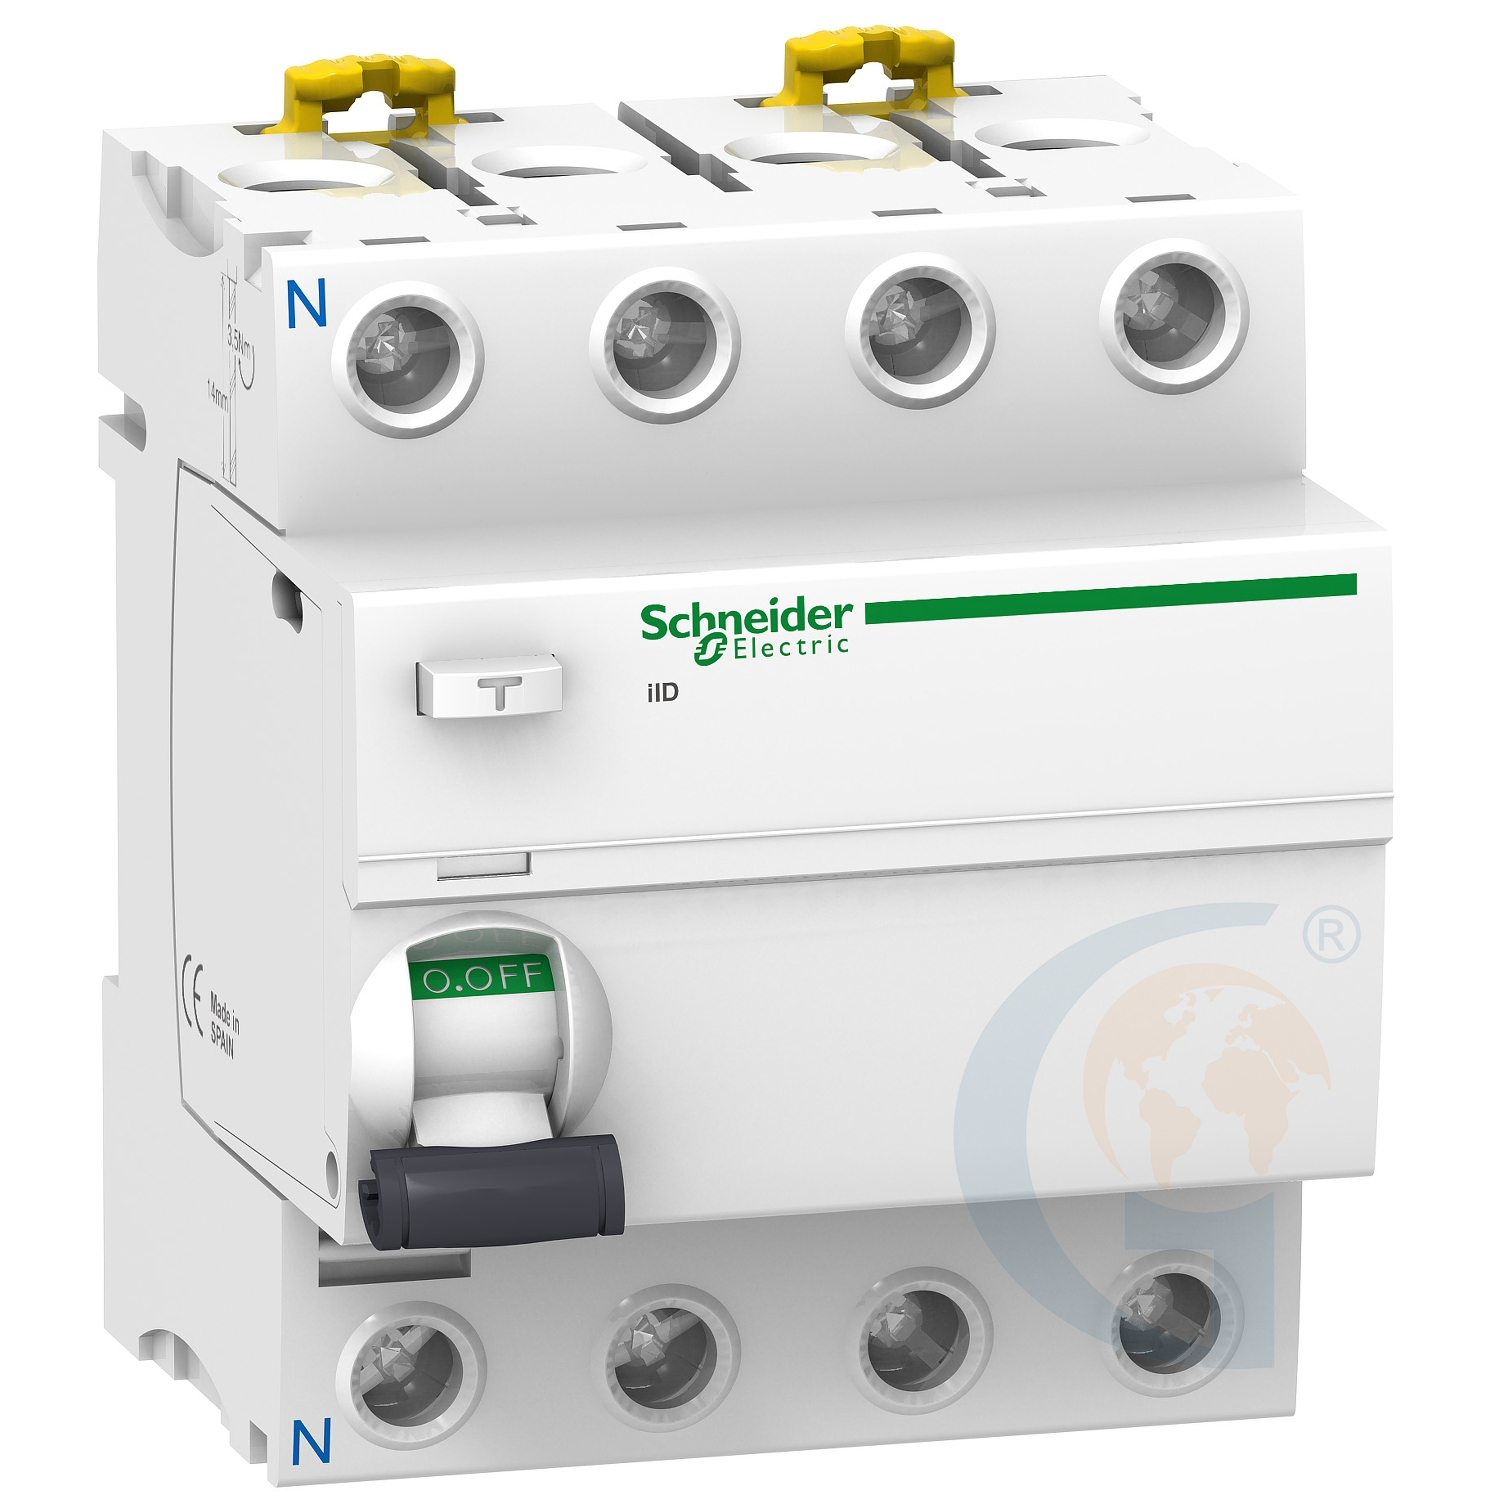 Schneider Electric A9R31440 ACTI 9 IID – RCCB – 4P – 40A – 30MA – TYPE A-SI https://gesrepair.com/wp-content/uploads/2020/Schneider/Schneider_Electric_A9R31440_.jpg